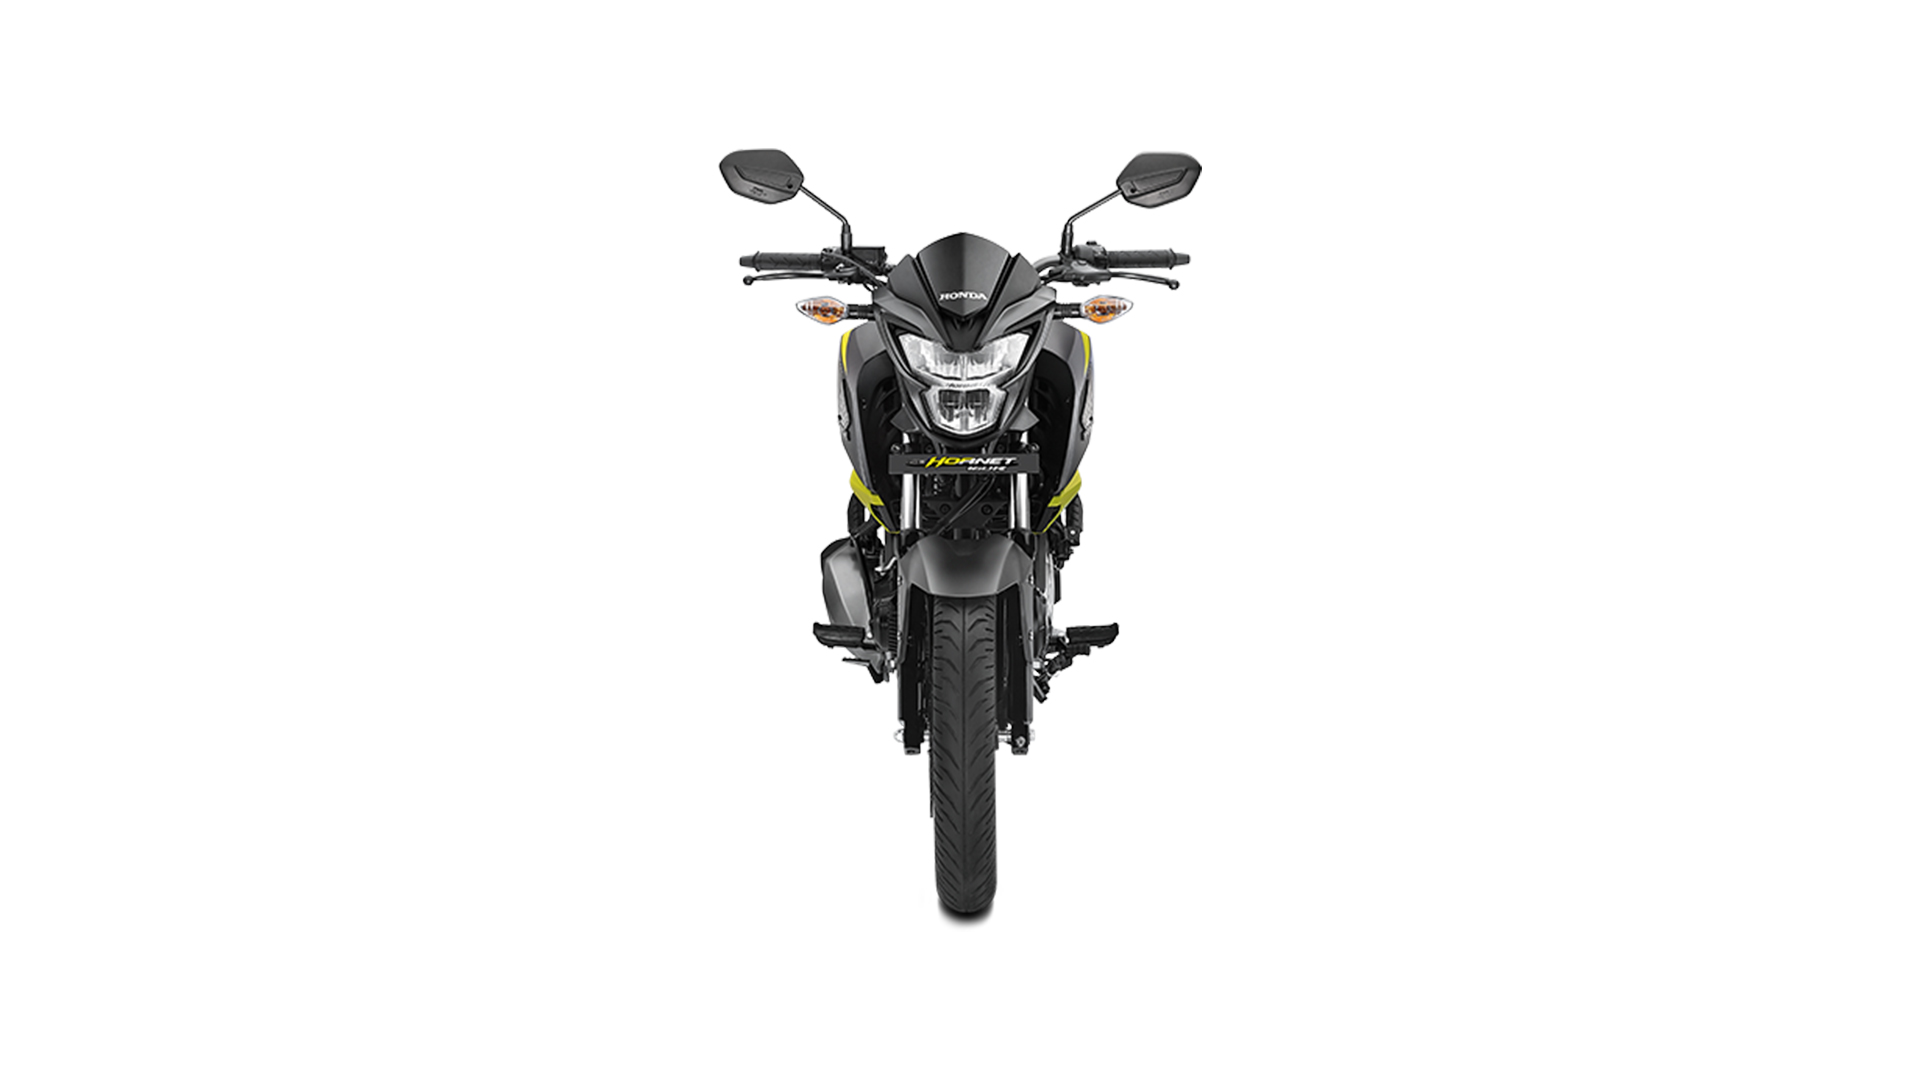 Honda Cb Hornet 160r 18 Abs Dlx Price Mileage Reviews Specification Gallery Overdrive